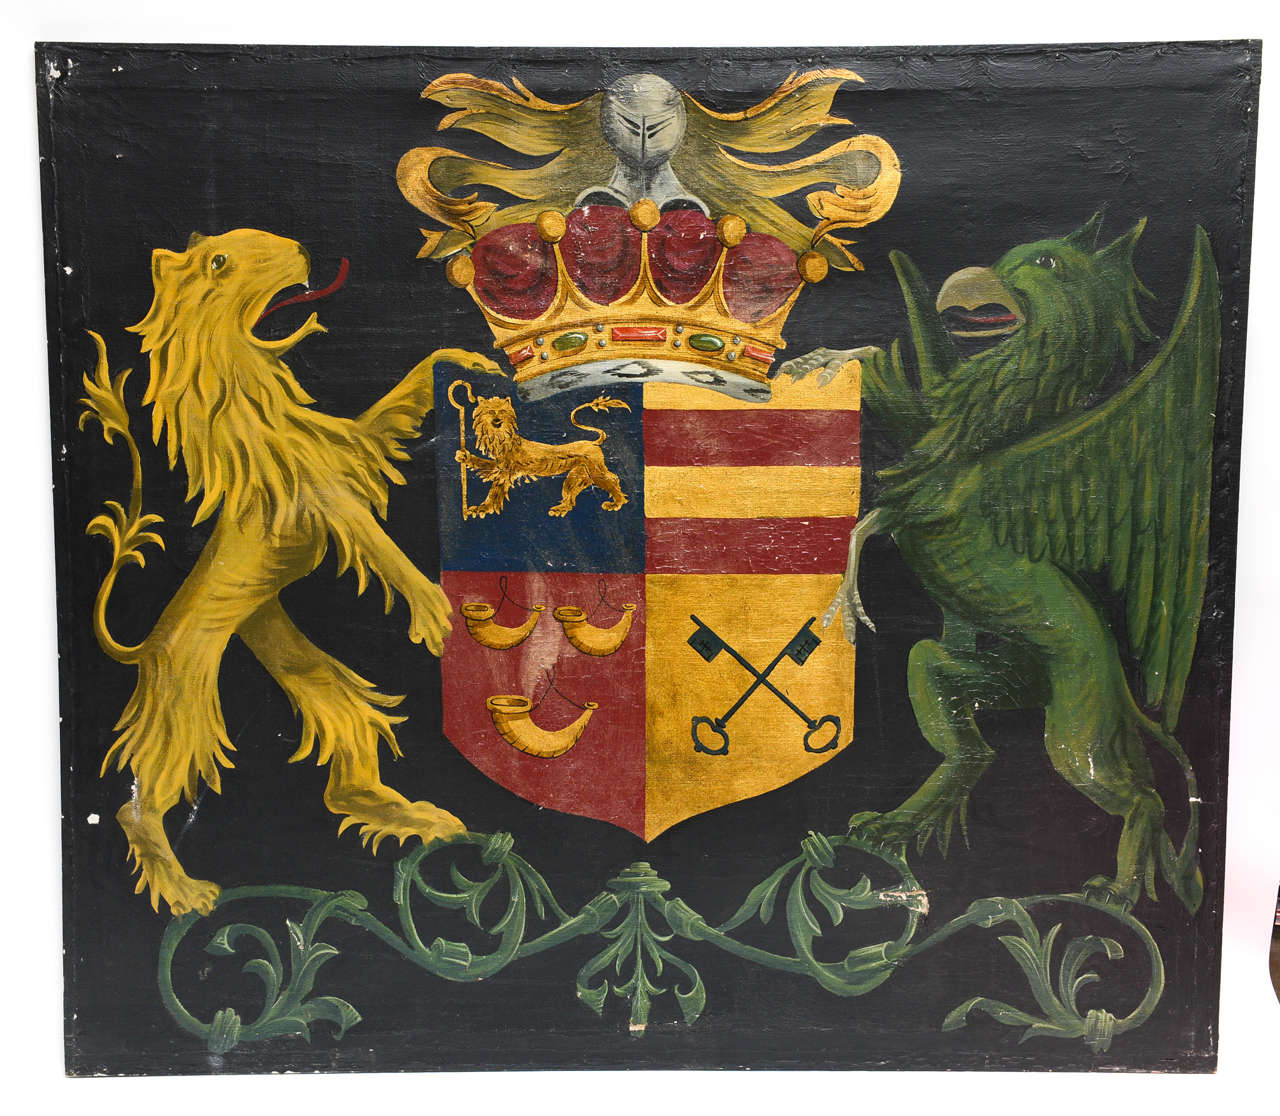 Fantastic pair of oil paintings on canvas depicting griffins, lions, dragons and coat of arms.